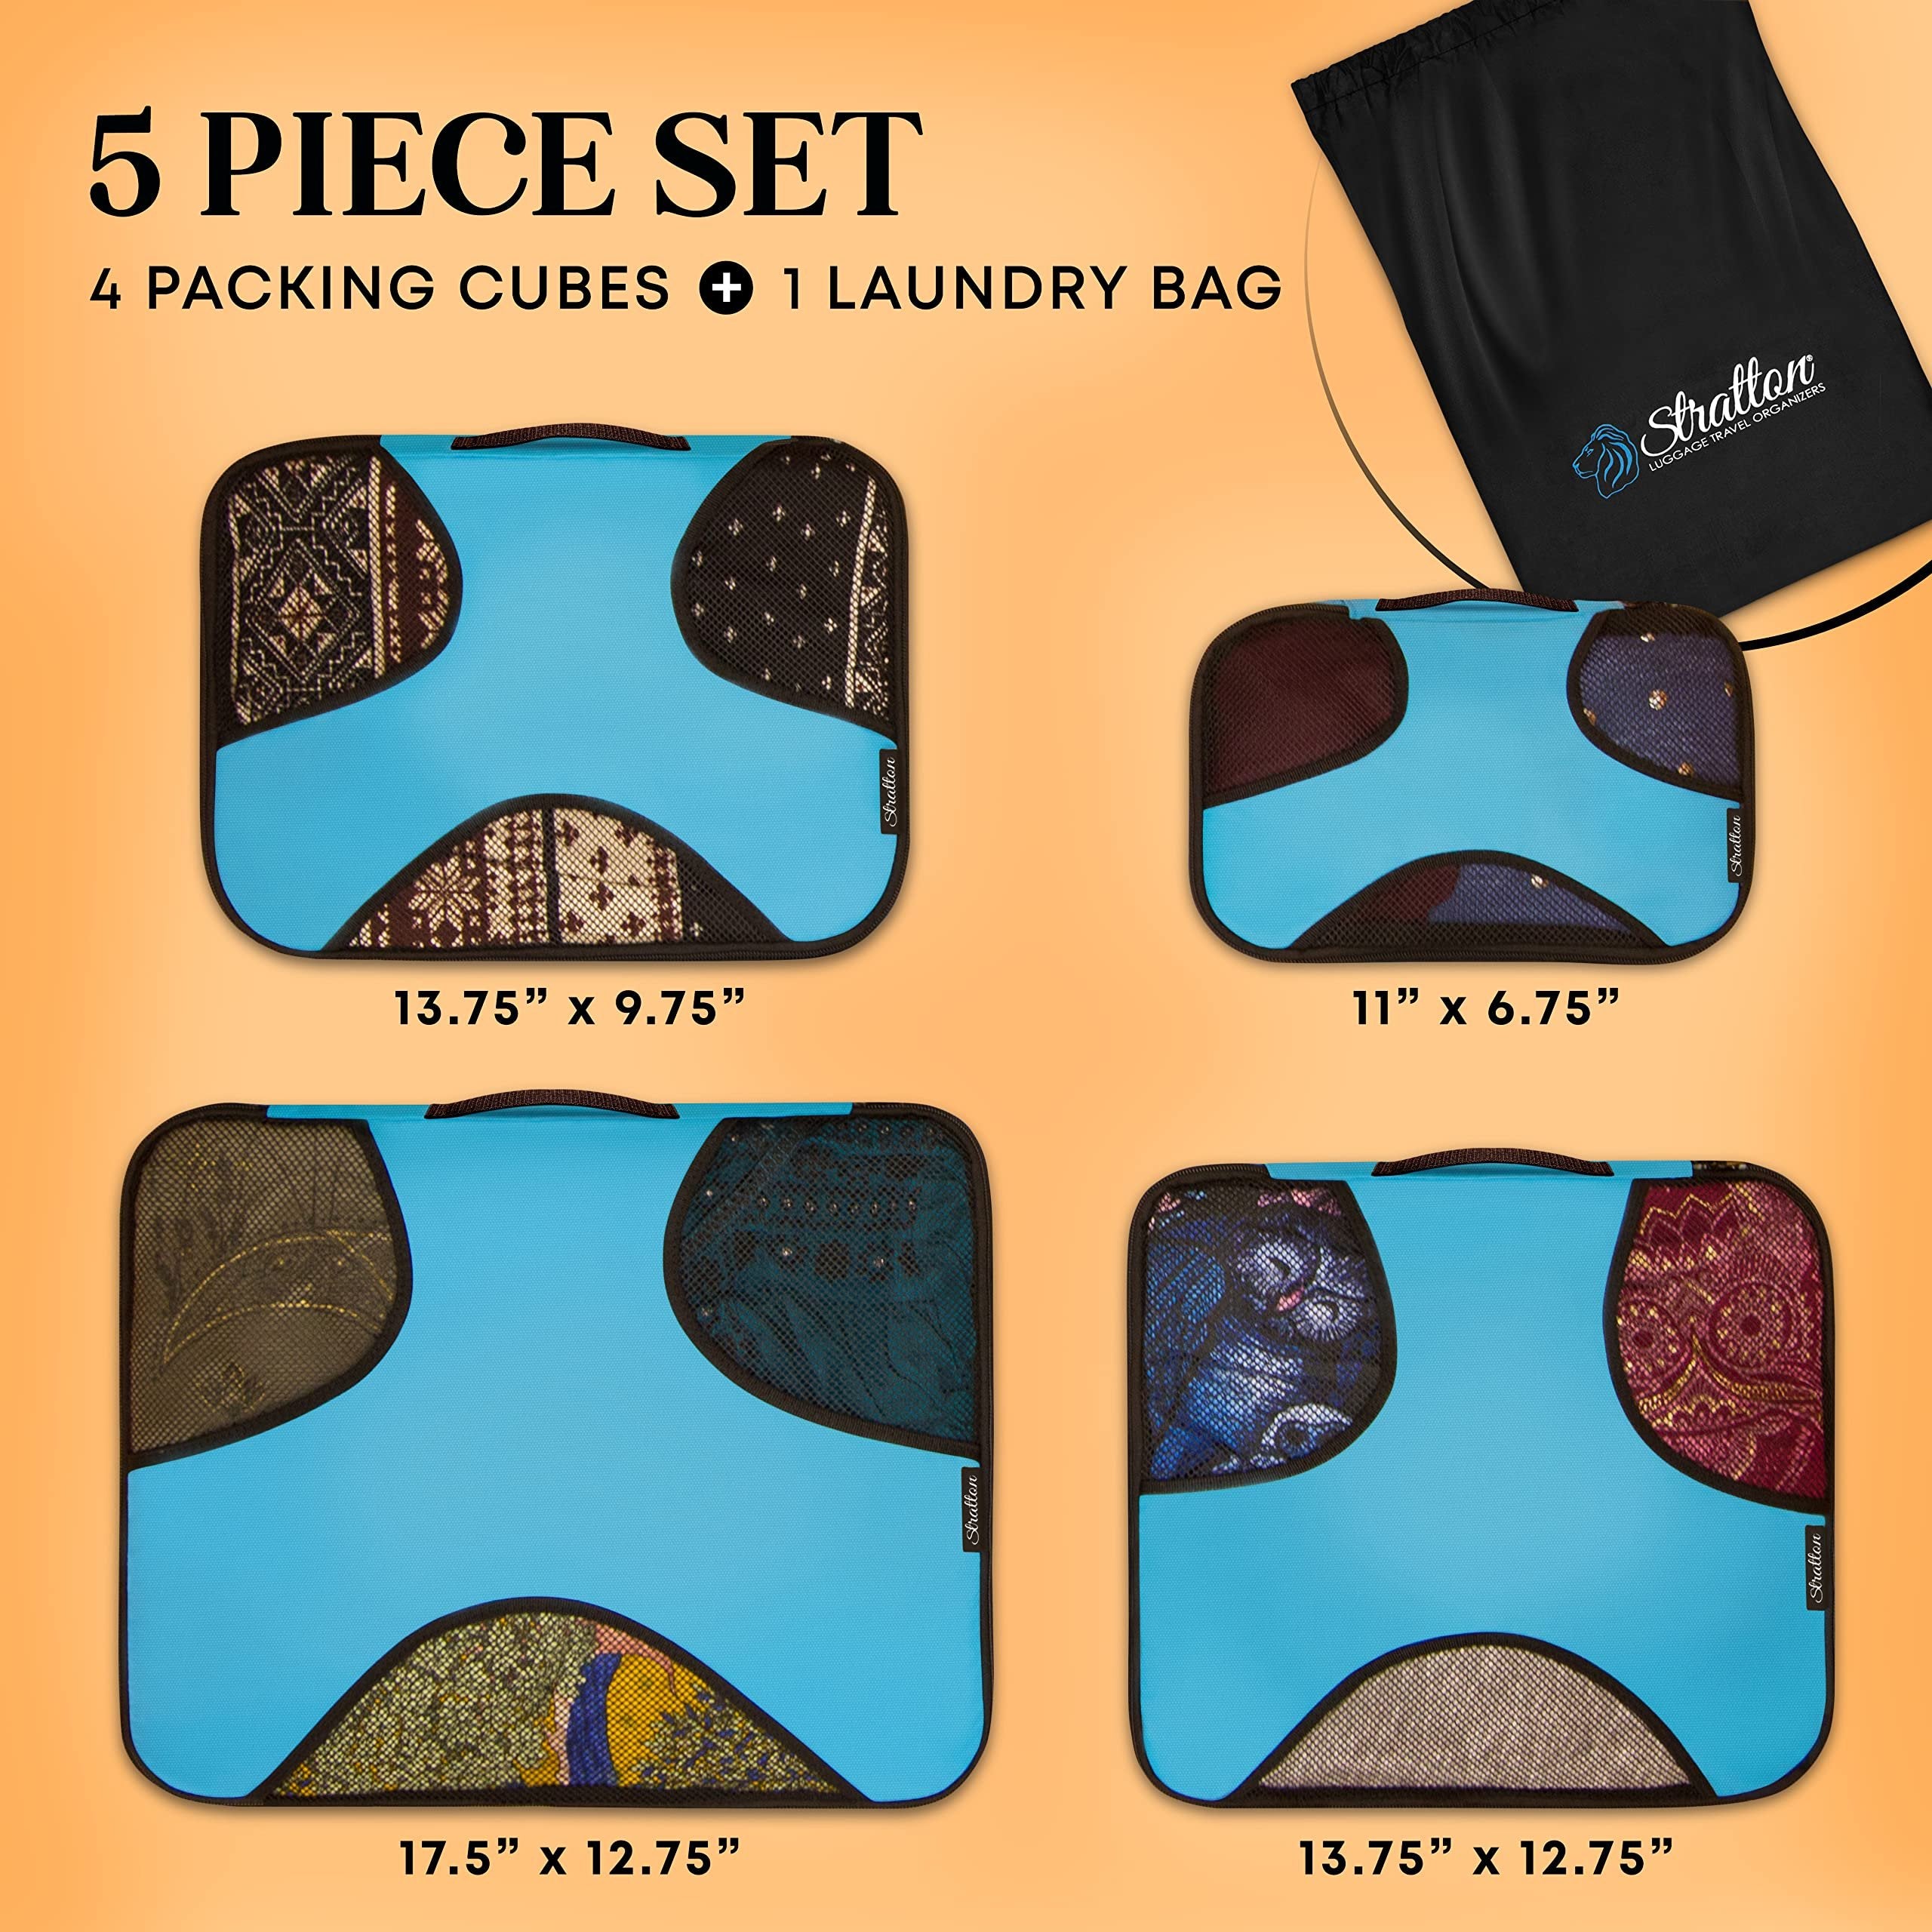 Stratton Packing Cubes Set of 5 | Aqua Teal | Travel Luggage Organizers + Laundry Bag | Free Shipping